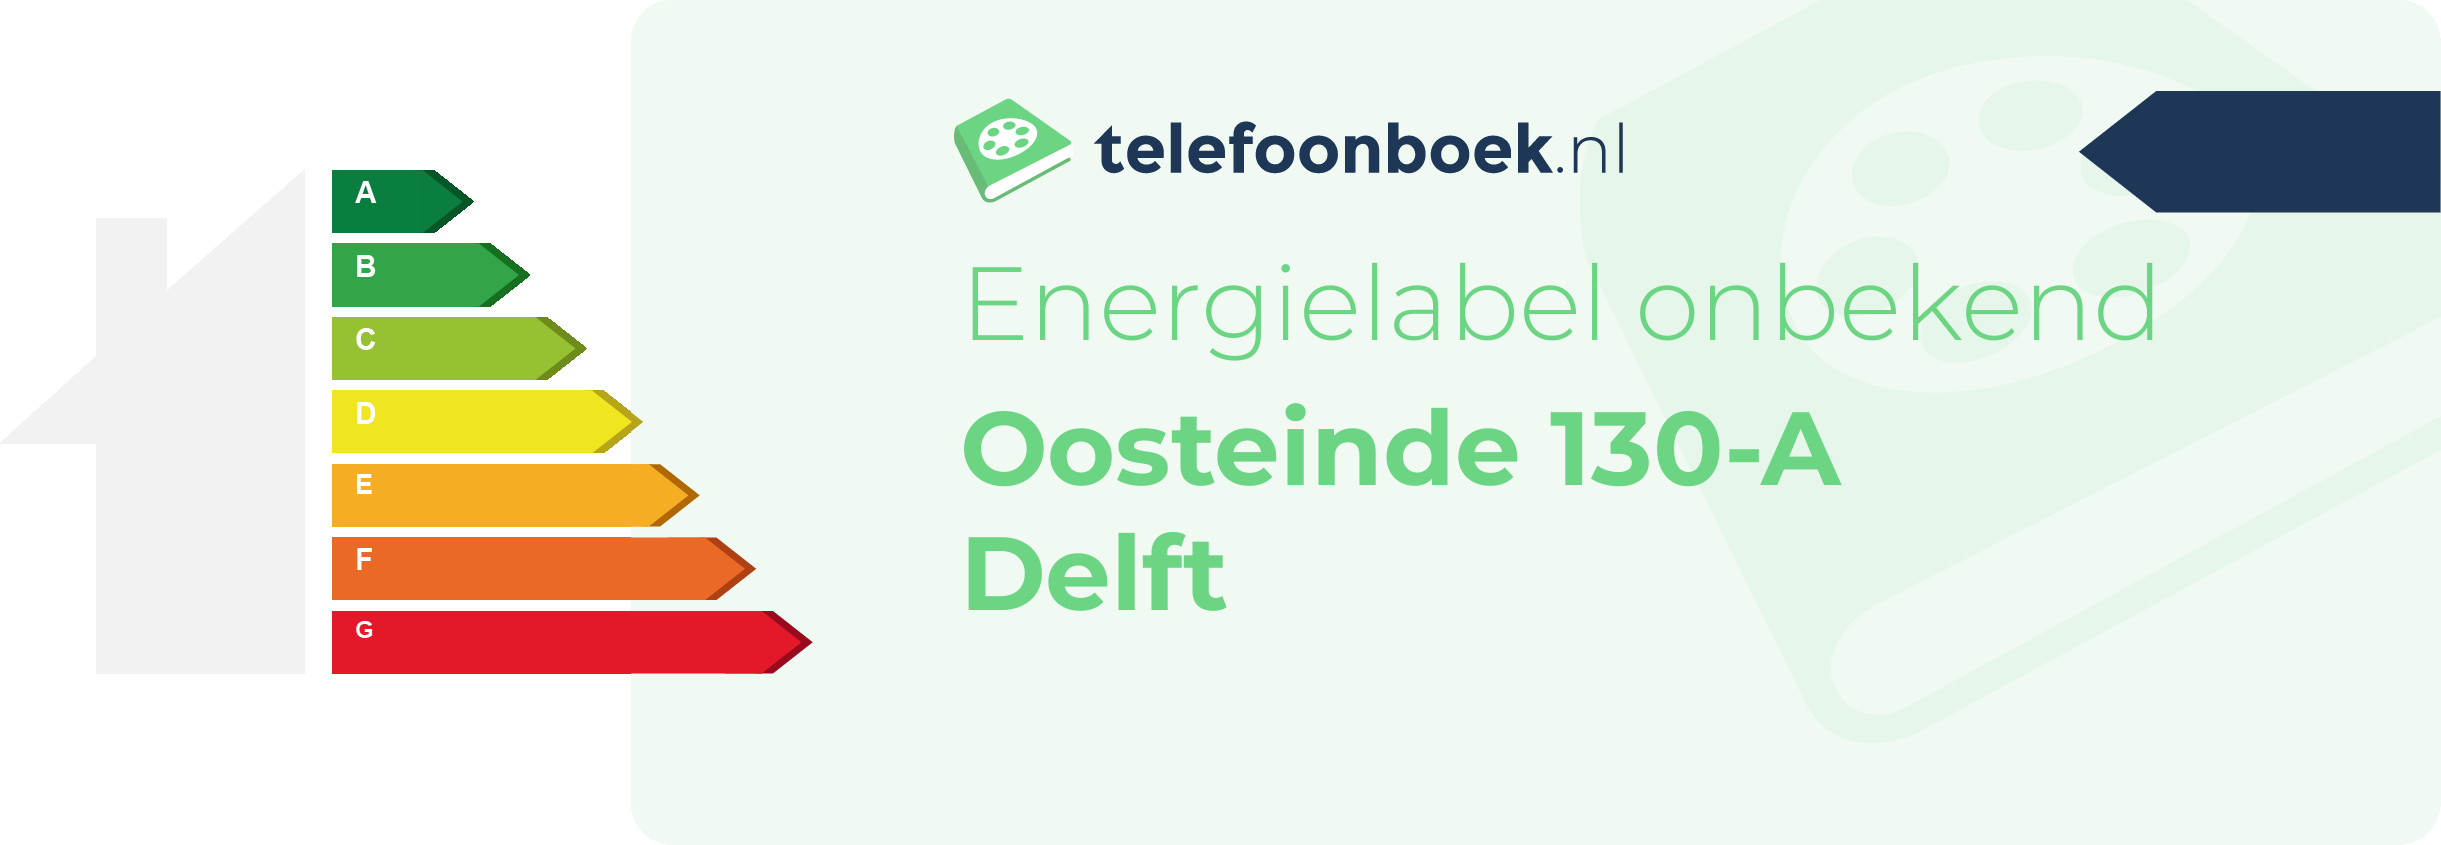 Energielabel Oosteinde 130-A Delft